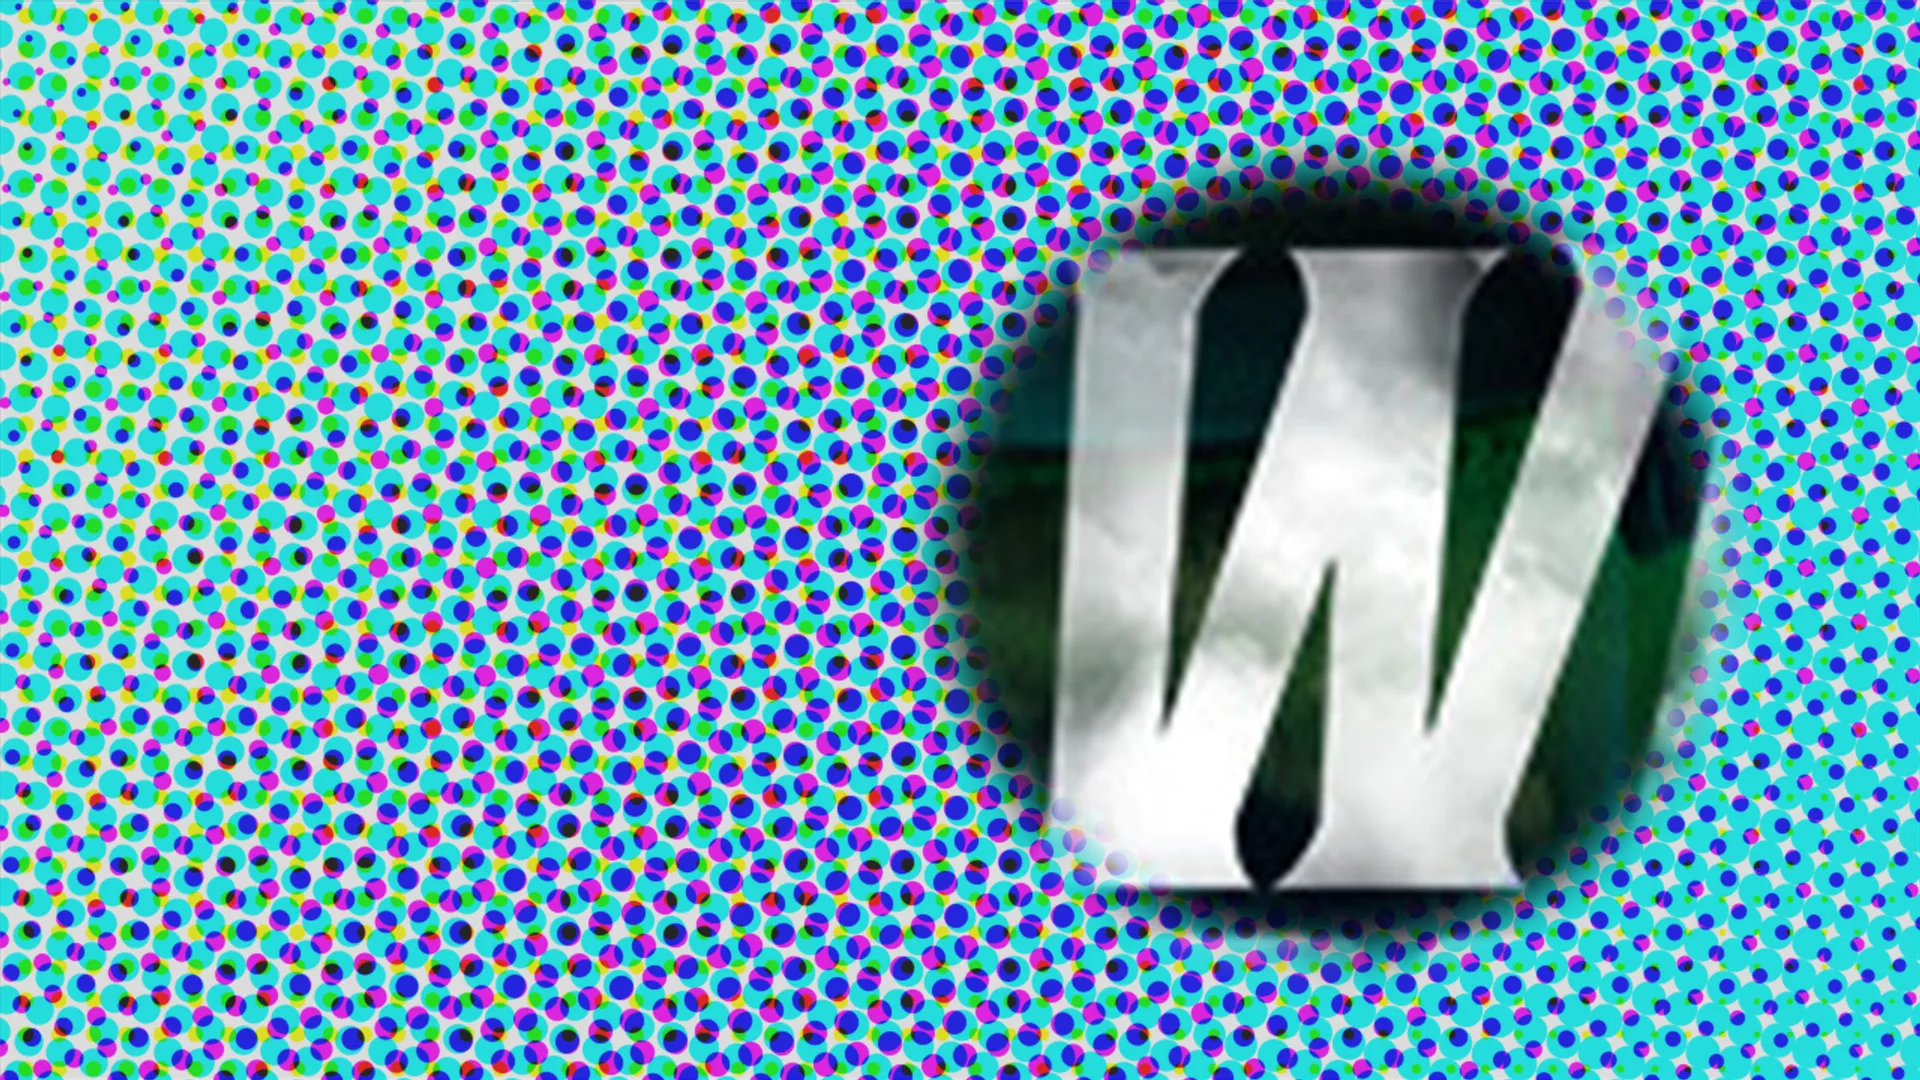 The letter 'W' leaning to the right